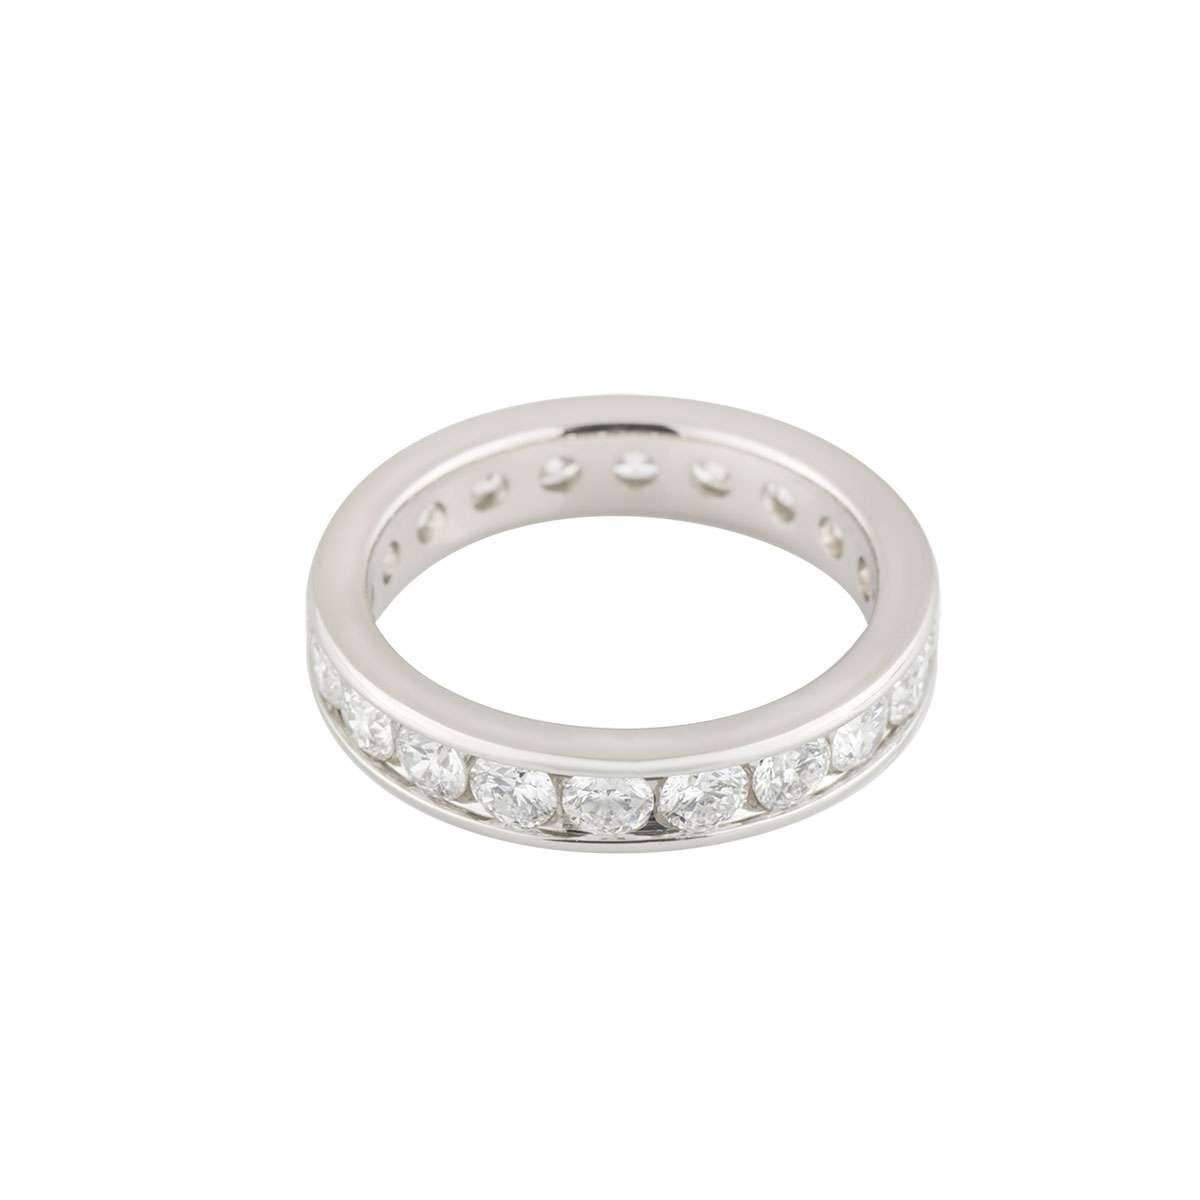 A beautiful diamond full eternity ring in platinum. The ring is channel set with 20 round brilliant cut diamonds totalling approximately 2.00ct, predominantly G-H colour and VS in clarity. The ring measures 4mm in width and is a US size 5 3/4, EU